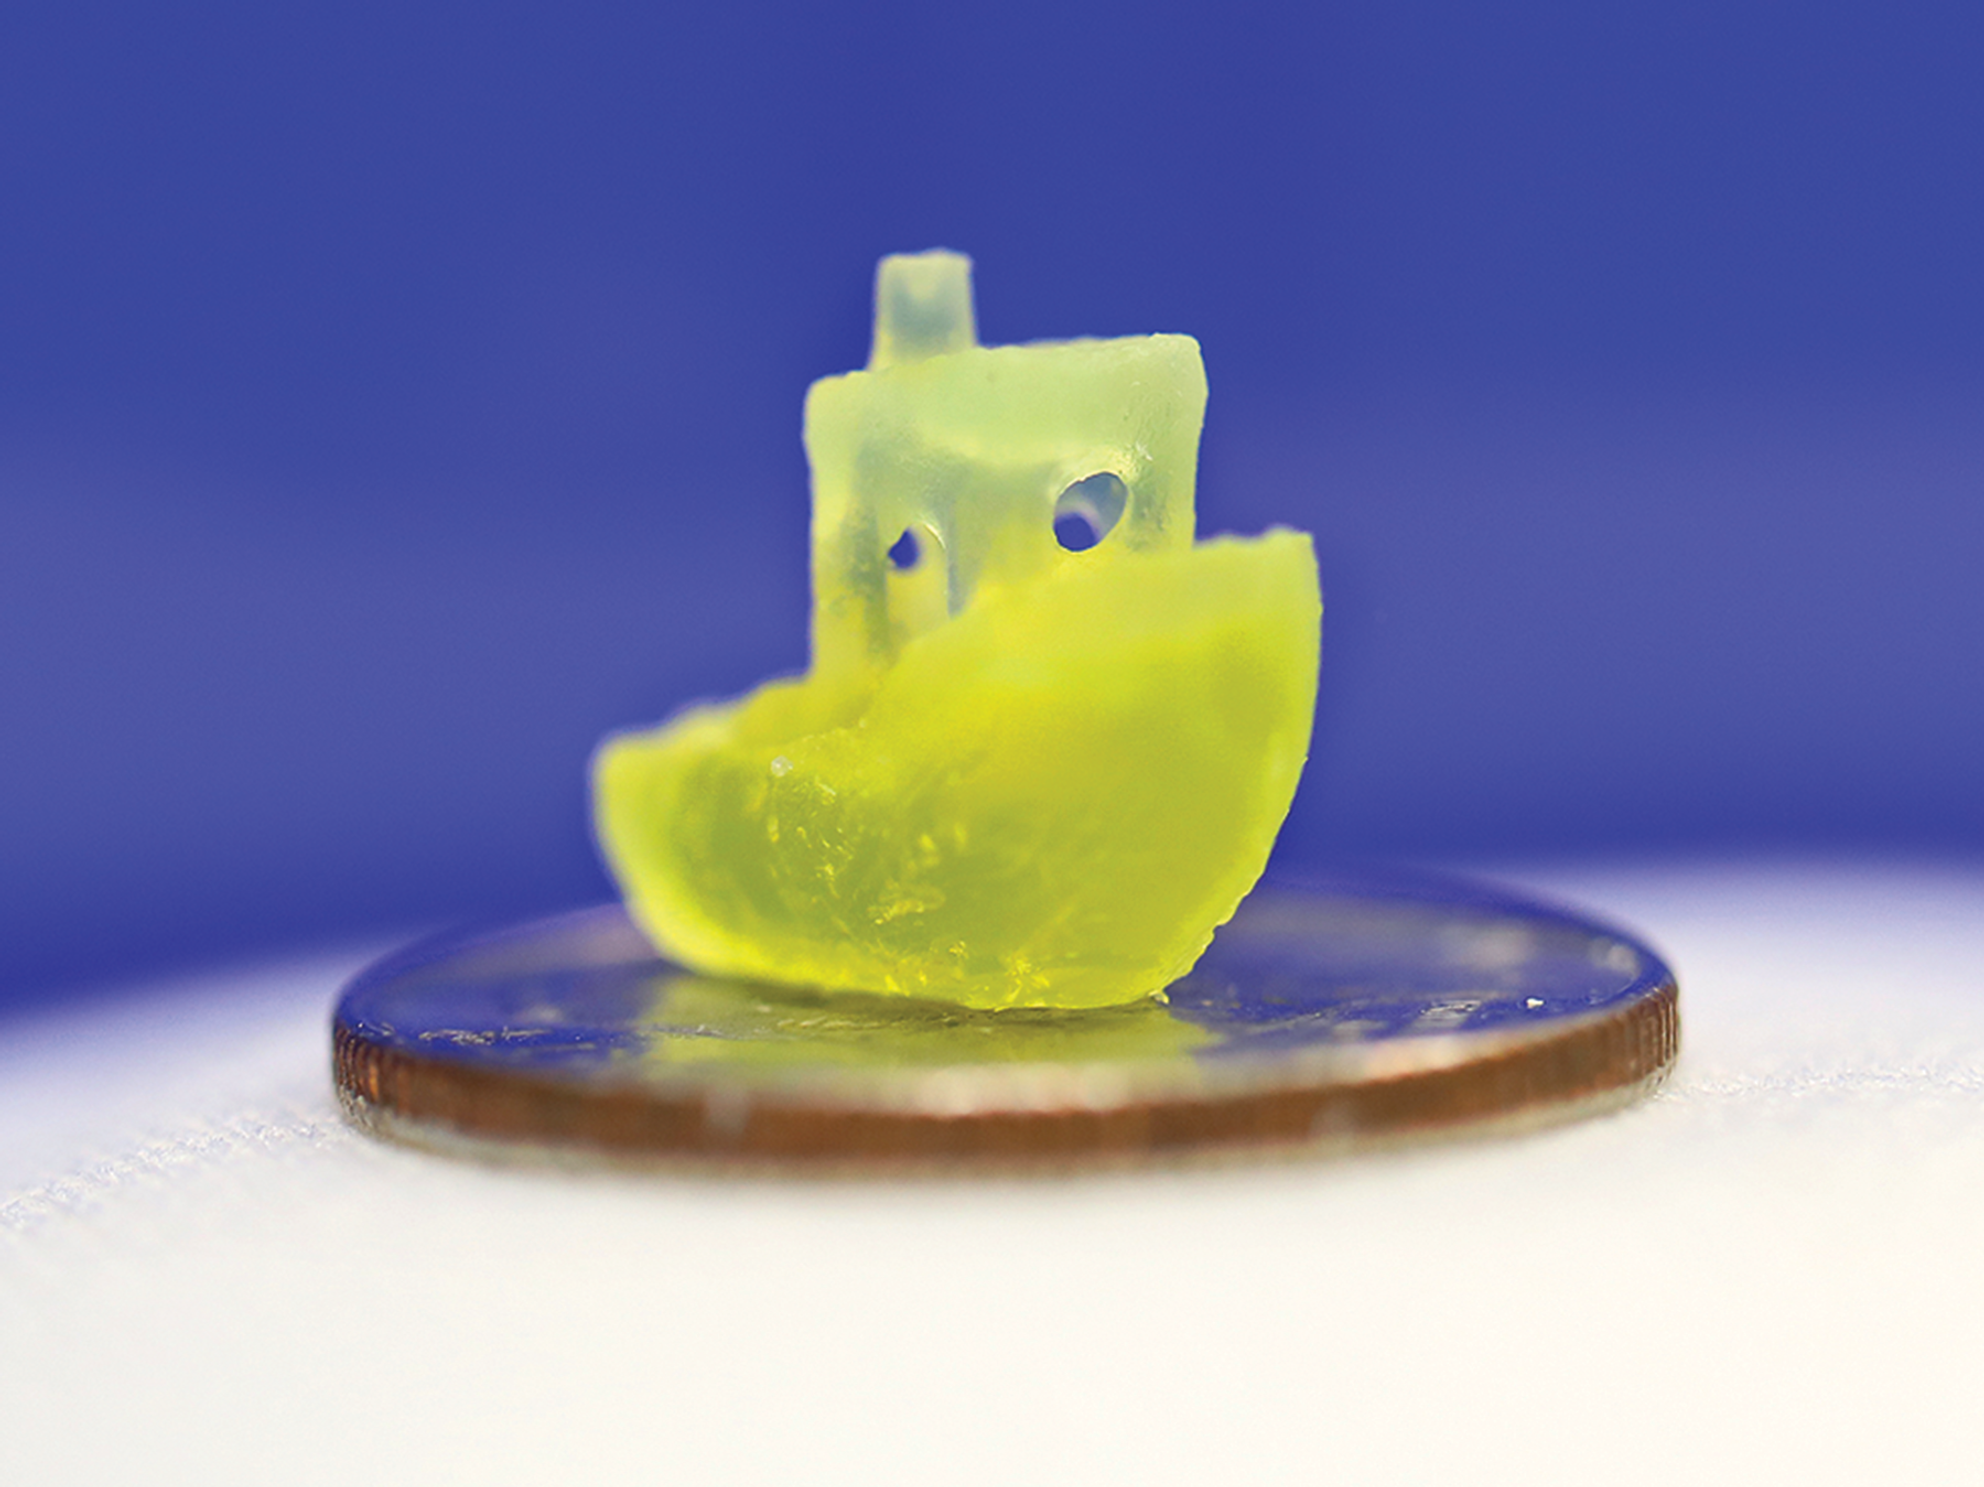 Stanford Researchers Enable Low Energy Resin Printing Using Photonic Upconversion